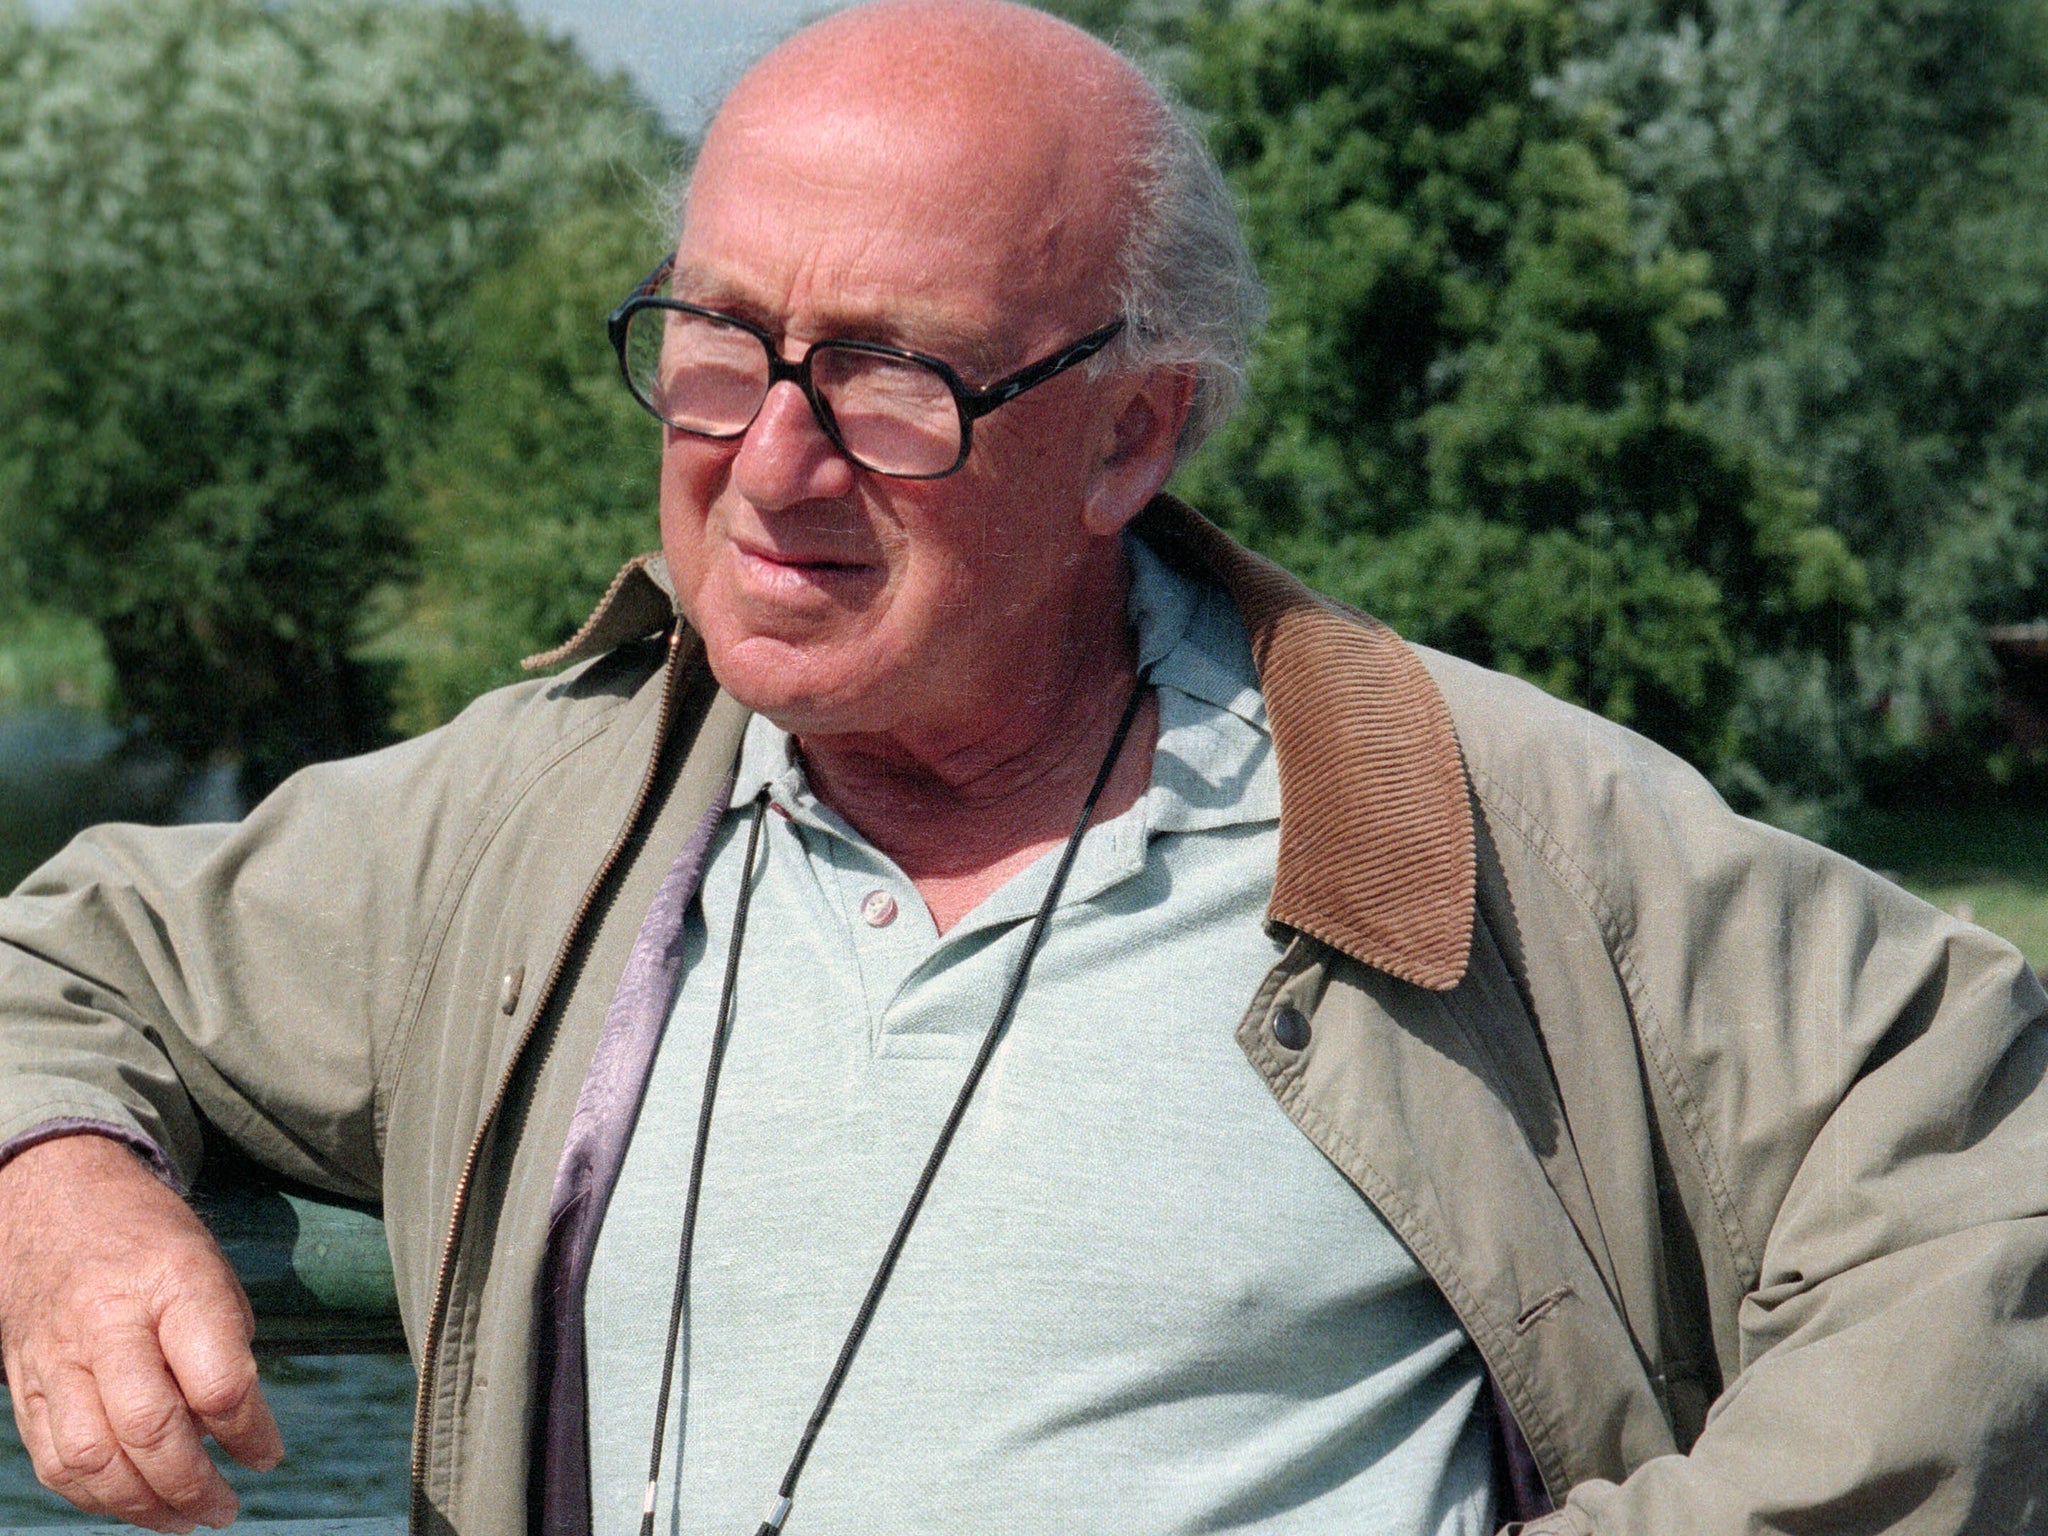 Wise on the set of 'Inspector Morse' in 1996